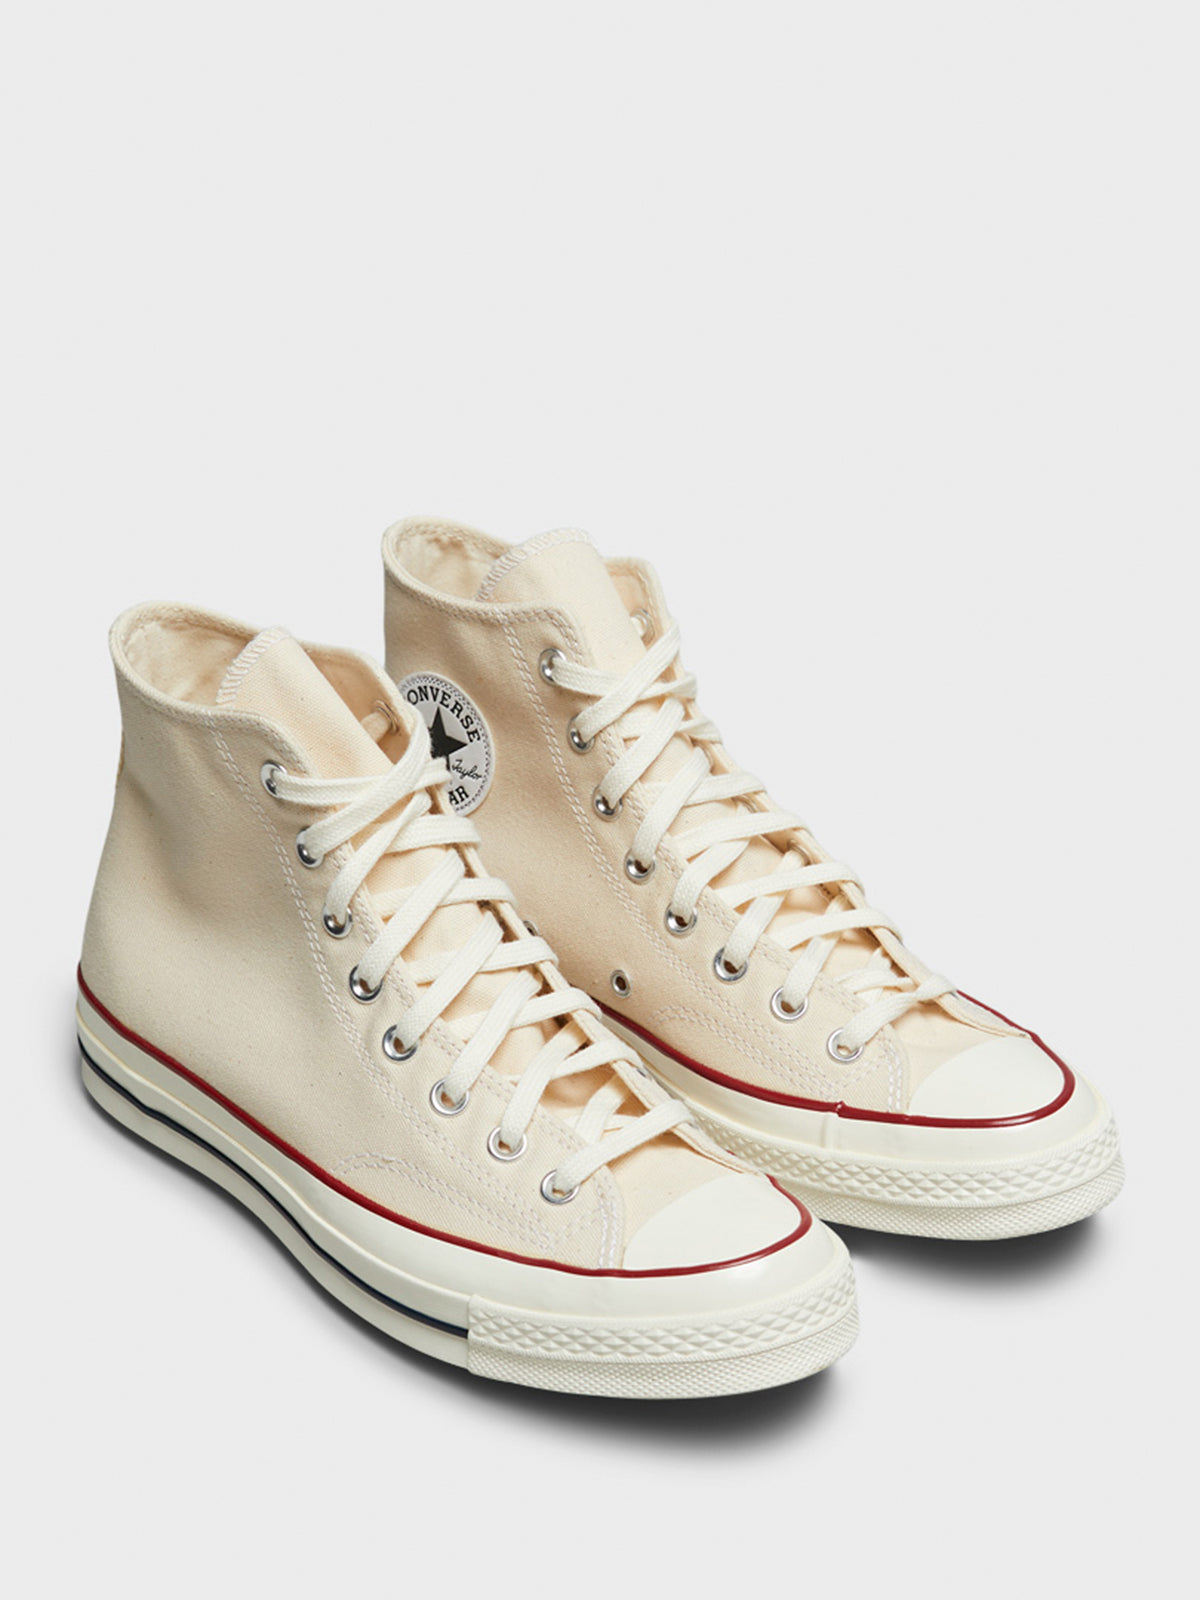 Chuck 70 High Top Canvas Sneakers in Off-White